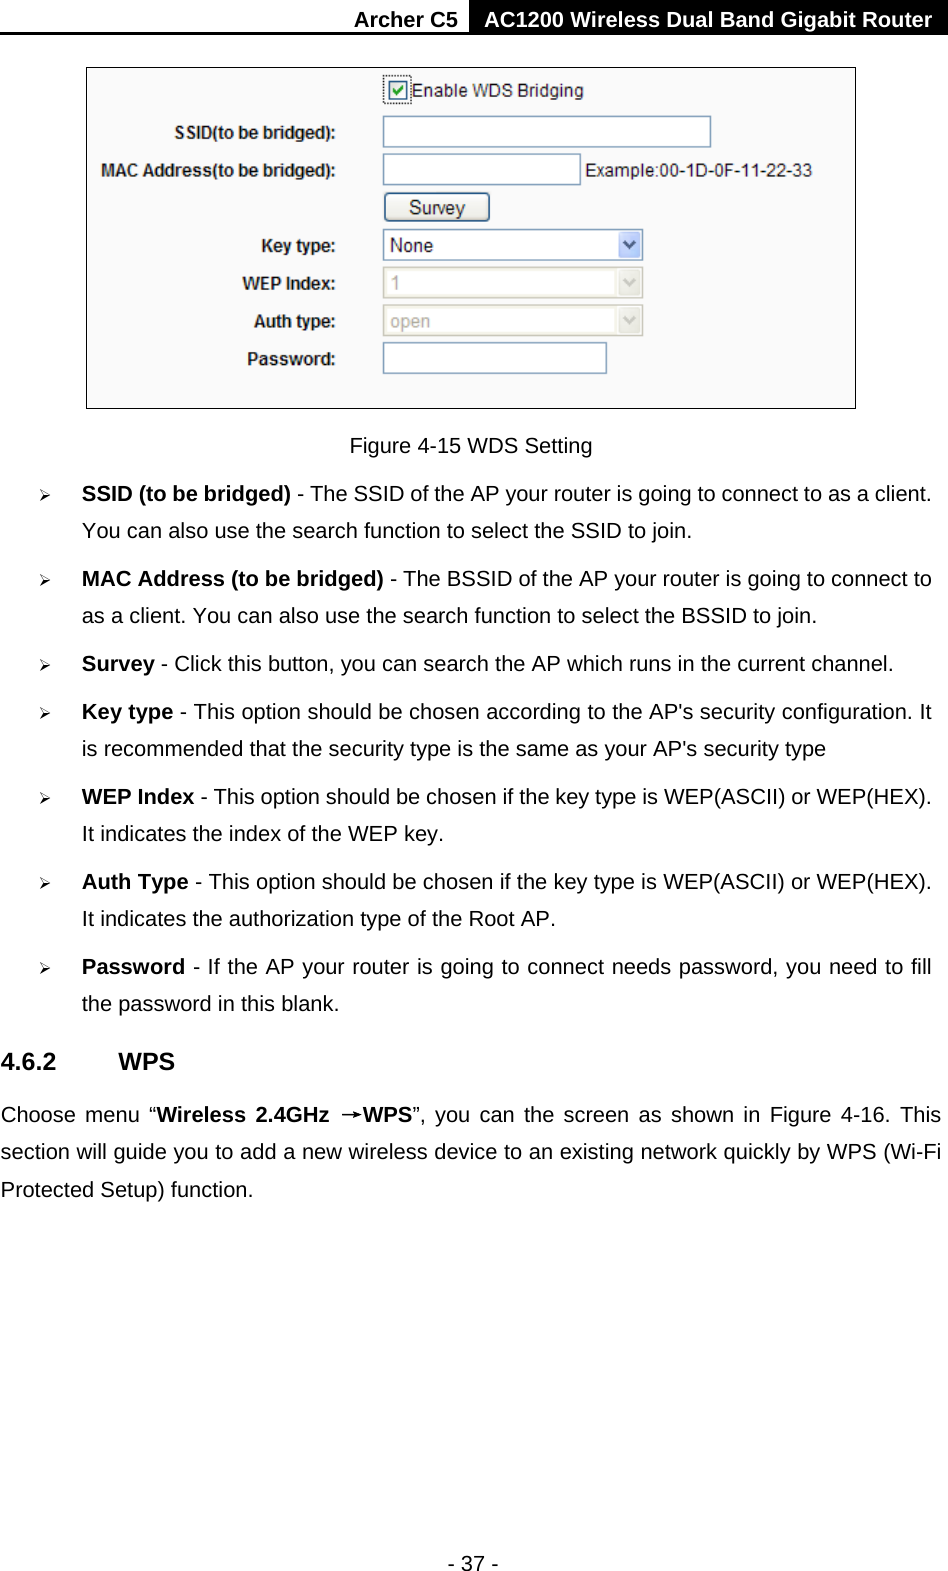 Archer C5 AC1200 Wireless Dual Band Gigabit Router  - 37 -  Figure 4-15 WDS Setting  SSID (to be bridged) - The SSID of the AP your router is going to connect to as a client. You can also use the search function to select the SSID to join.  MAC Address (to be bridged) - The BSSID of the AP your router is going to connect to as a client. You can also use the search function to select the BSSID to join.  Survey - Click this button, you can search the AP which runs in the current channel.  Key type - This option should be chosen according to the AP&apos;s security configuration. It is recommended that the security type is the same as your AP&apos;s security type  WEP Index - This option should be chosen if the key type is WEP(ASCII) or WEP(HEX). It indicates the index of the WEP key.  Auth Type - This option should be chosen if the key type is WEP(ASCII) or WEP(HEX). It indicates the authorization type of the Root AP.  Password - If the AP your router is going to connect needs password, you need to fill the password in this blank. 4.6.2 WPS Choose menu “Wireless 2.4GHz →WPS”, you can the screen as shown in Figure 4-16. This section will guide you to add a new wireless device to an existing network quickly by WPS (Wi-Fi Protected Setup) function.   